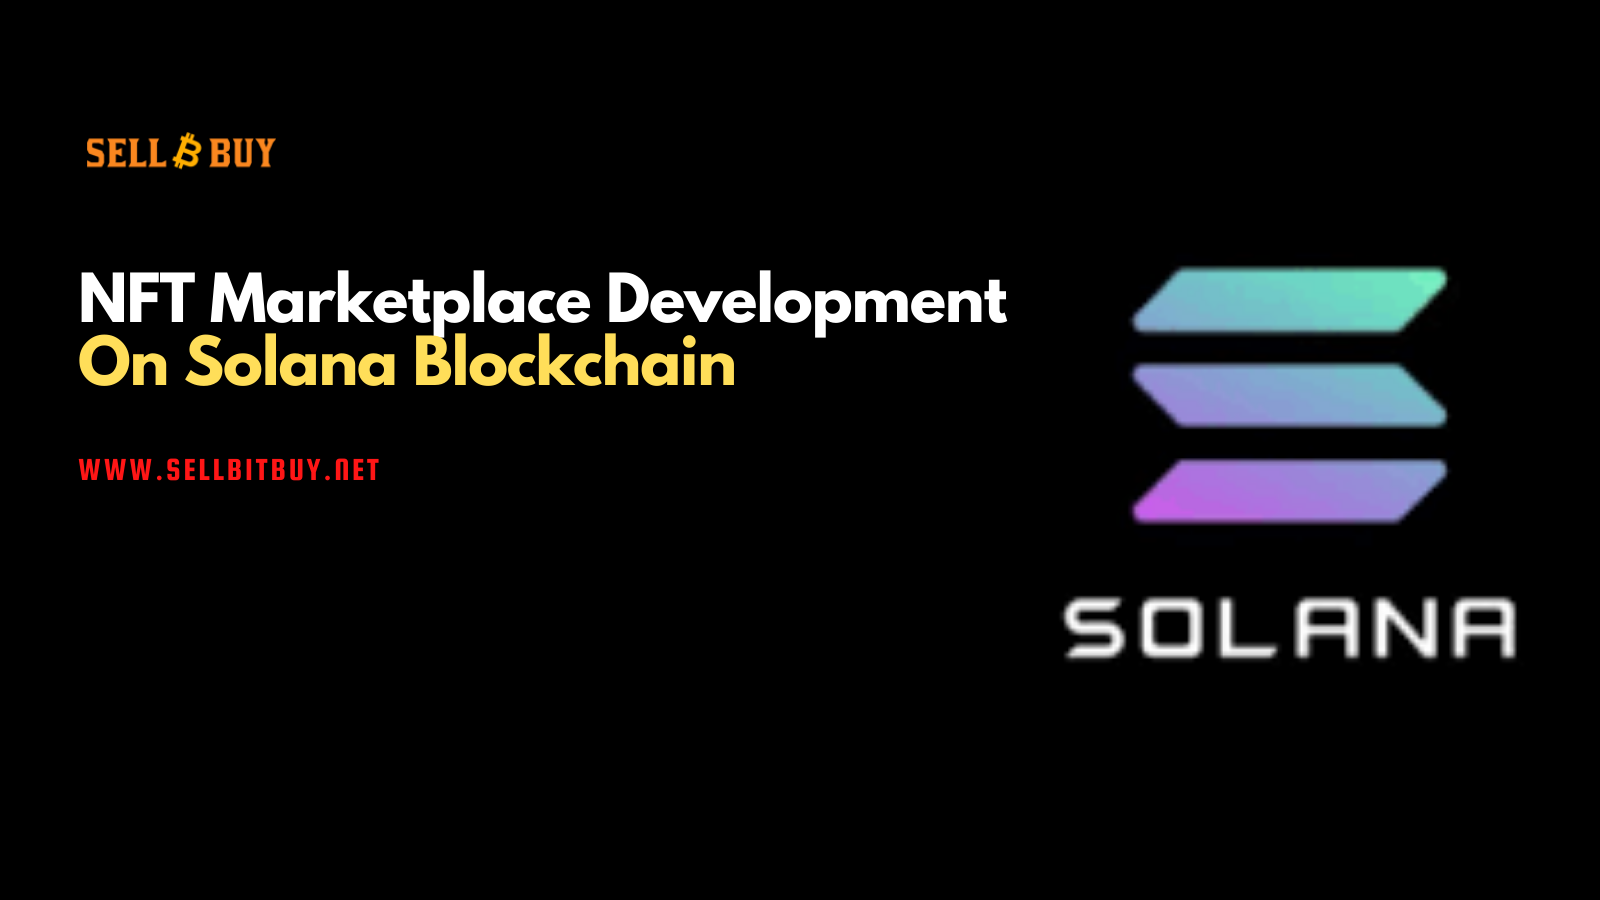 Article about Why Choose Solana For NFT Marketplace Development